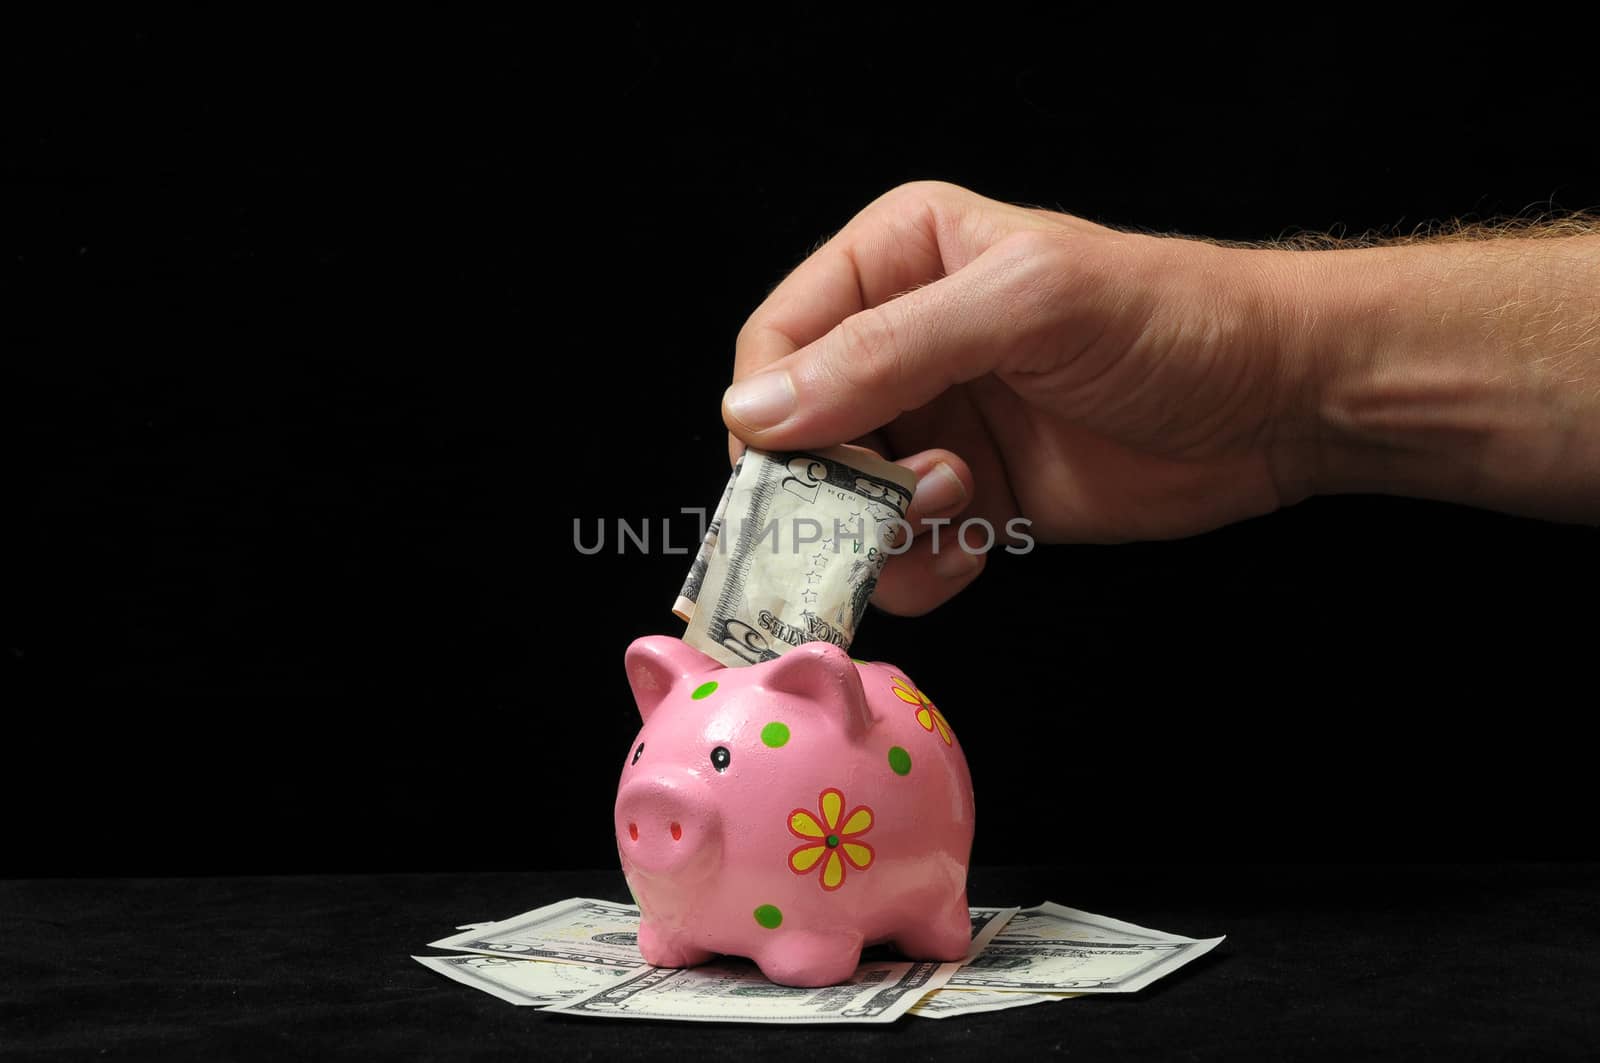 Save Money with One Pink Pig Piggy Bank